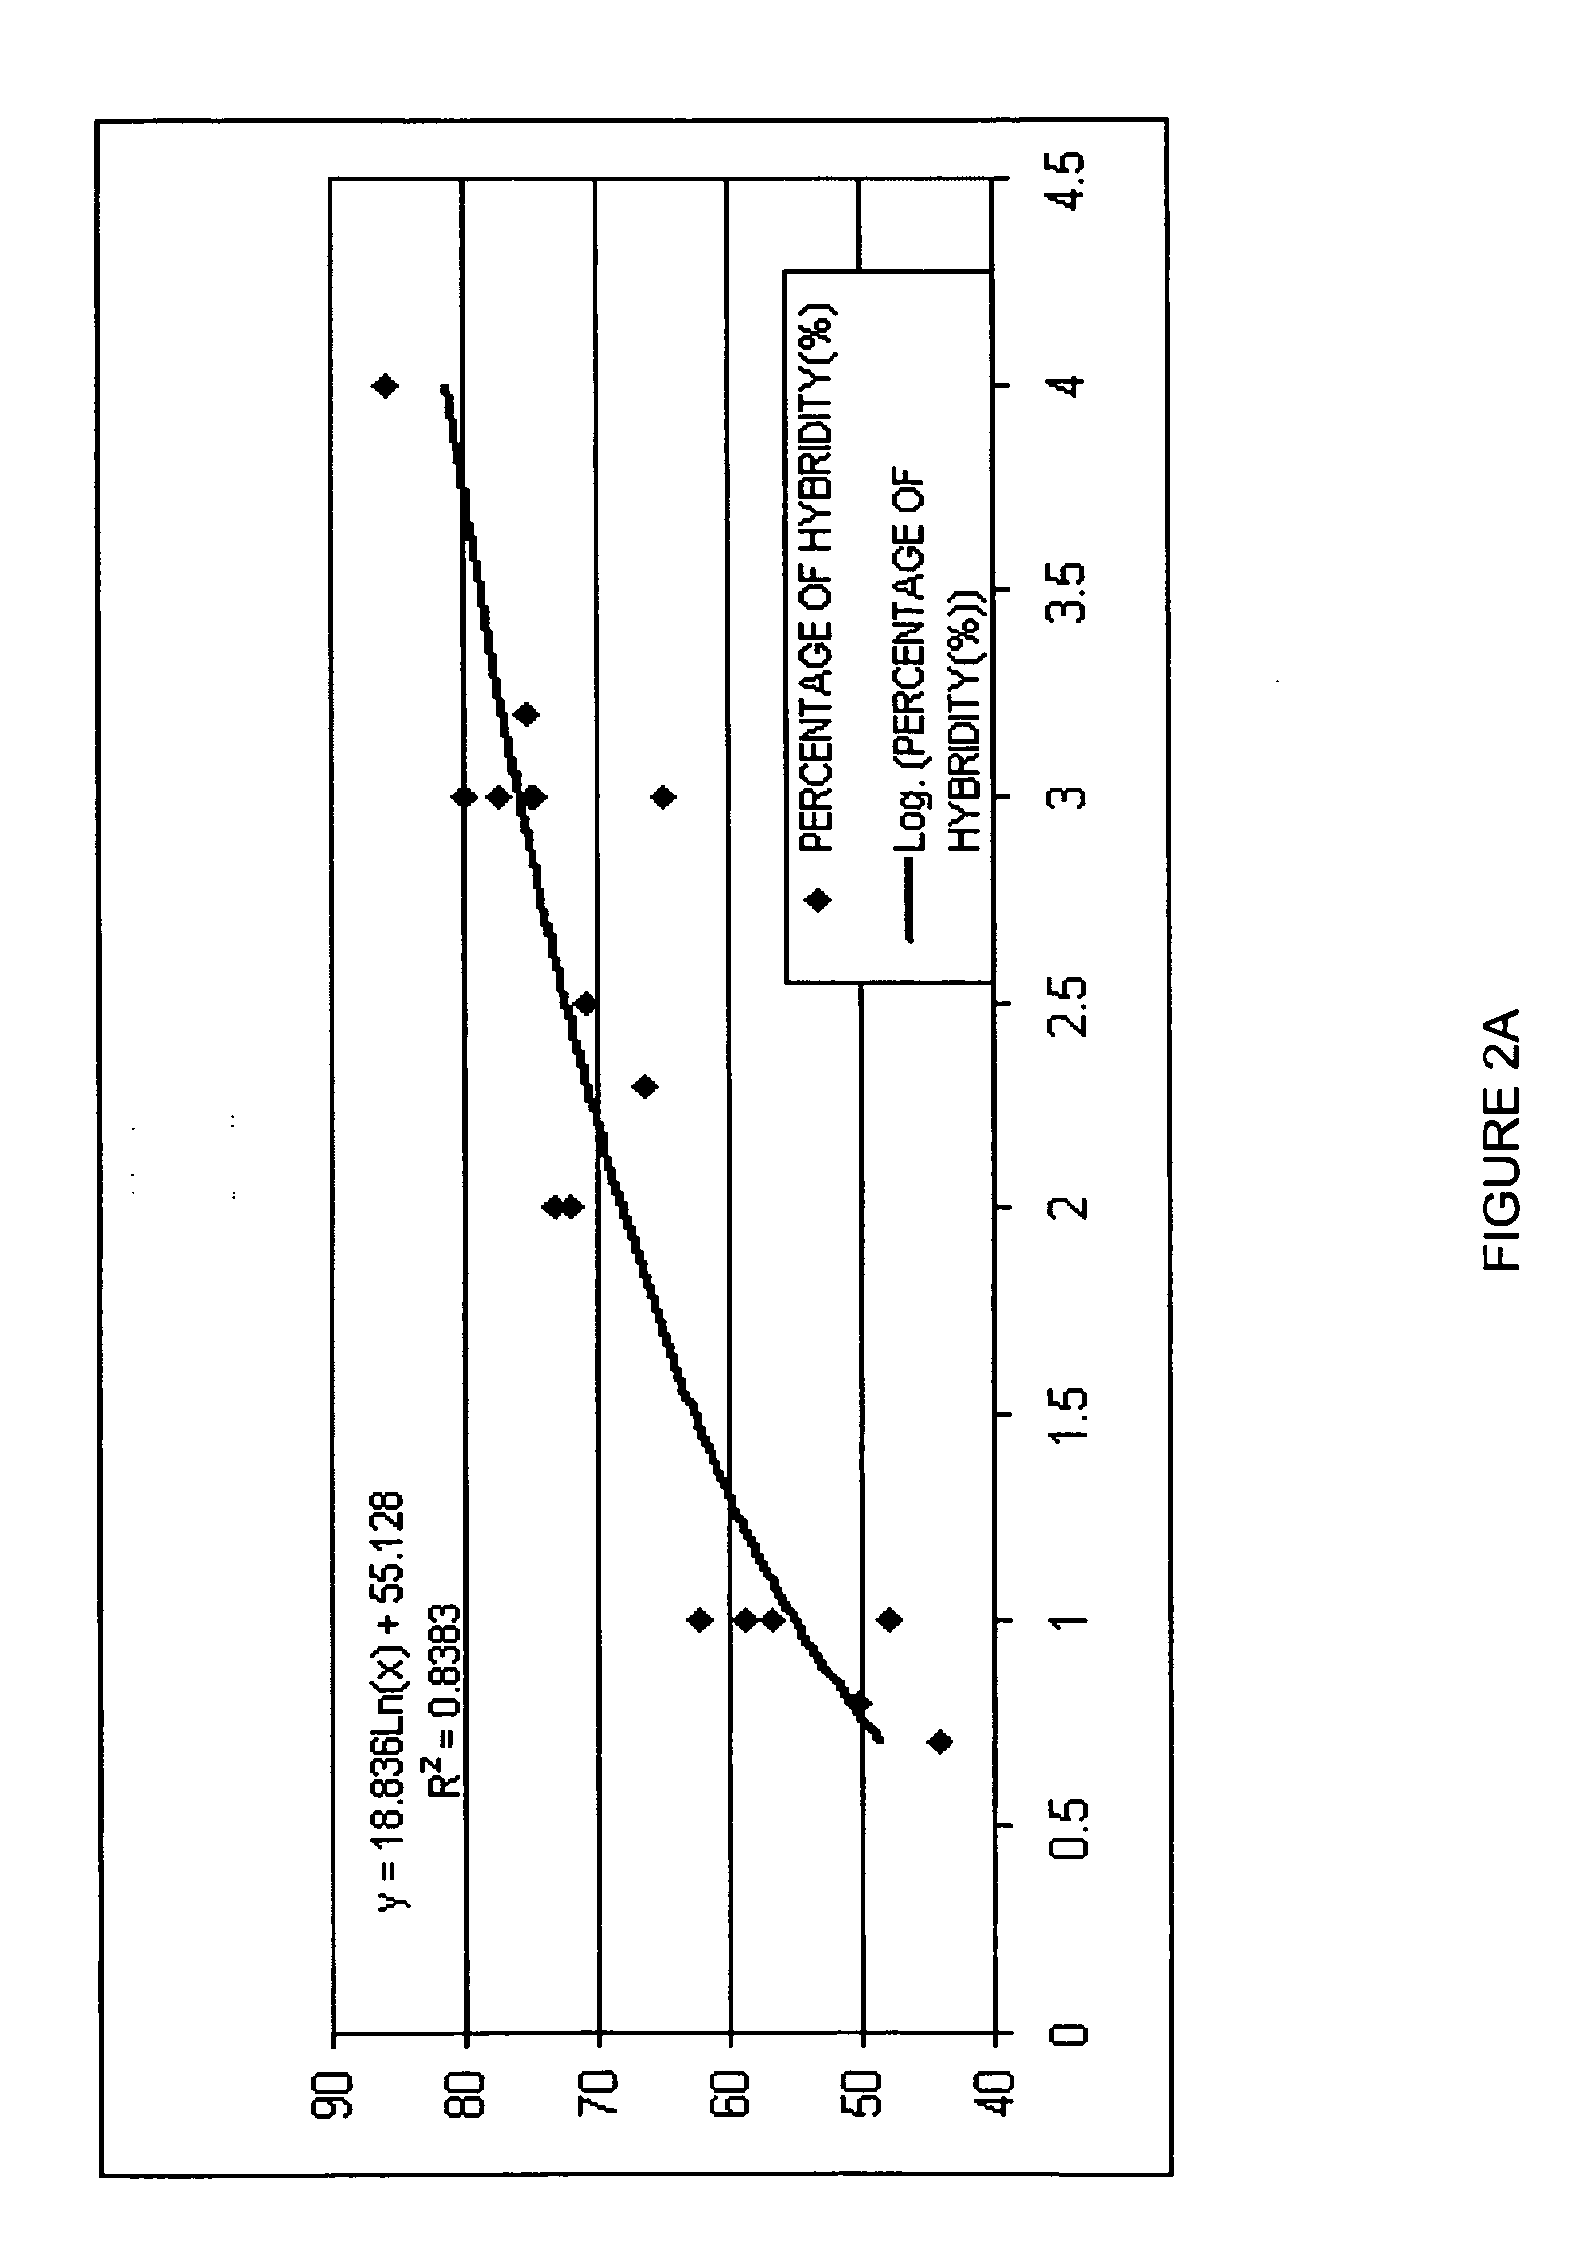 Methods for producing a hybrid seed product